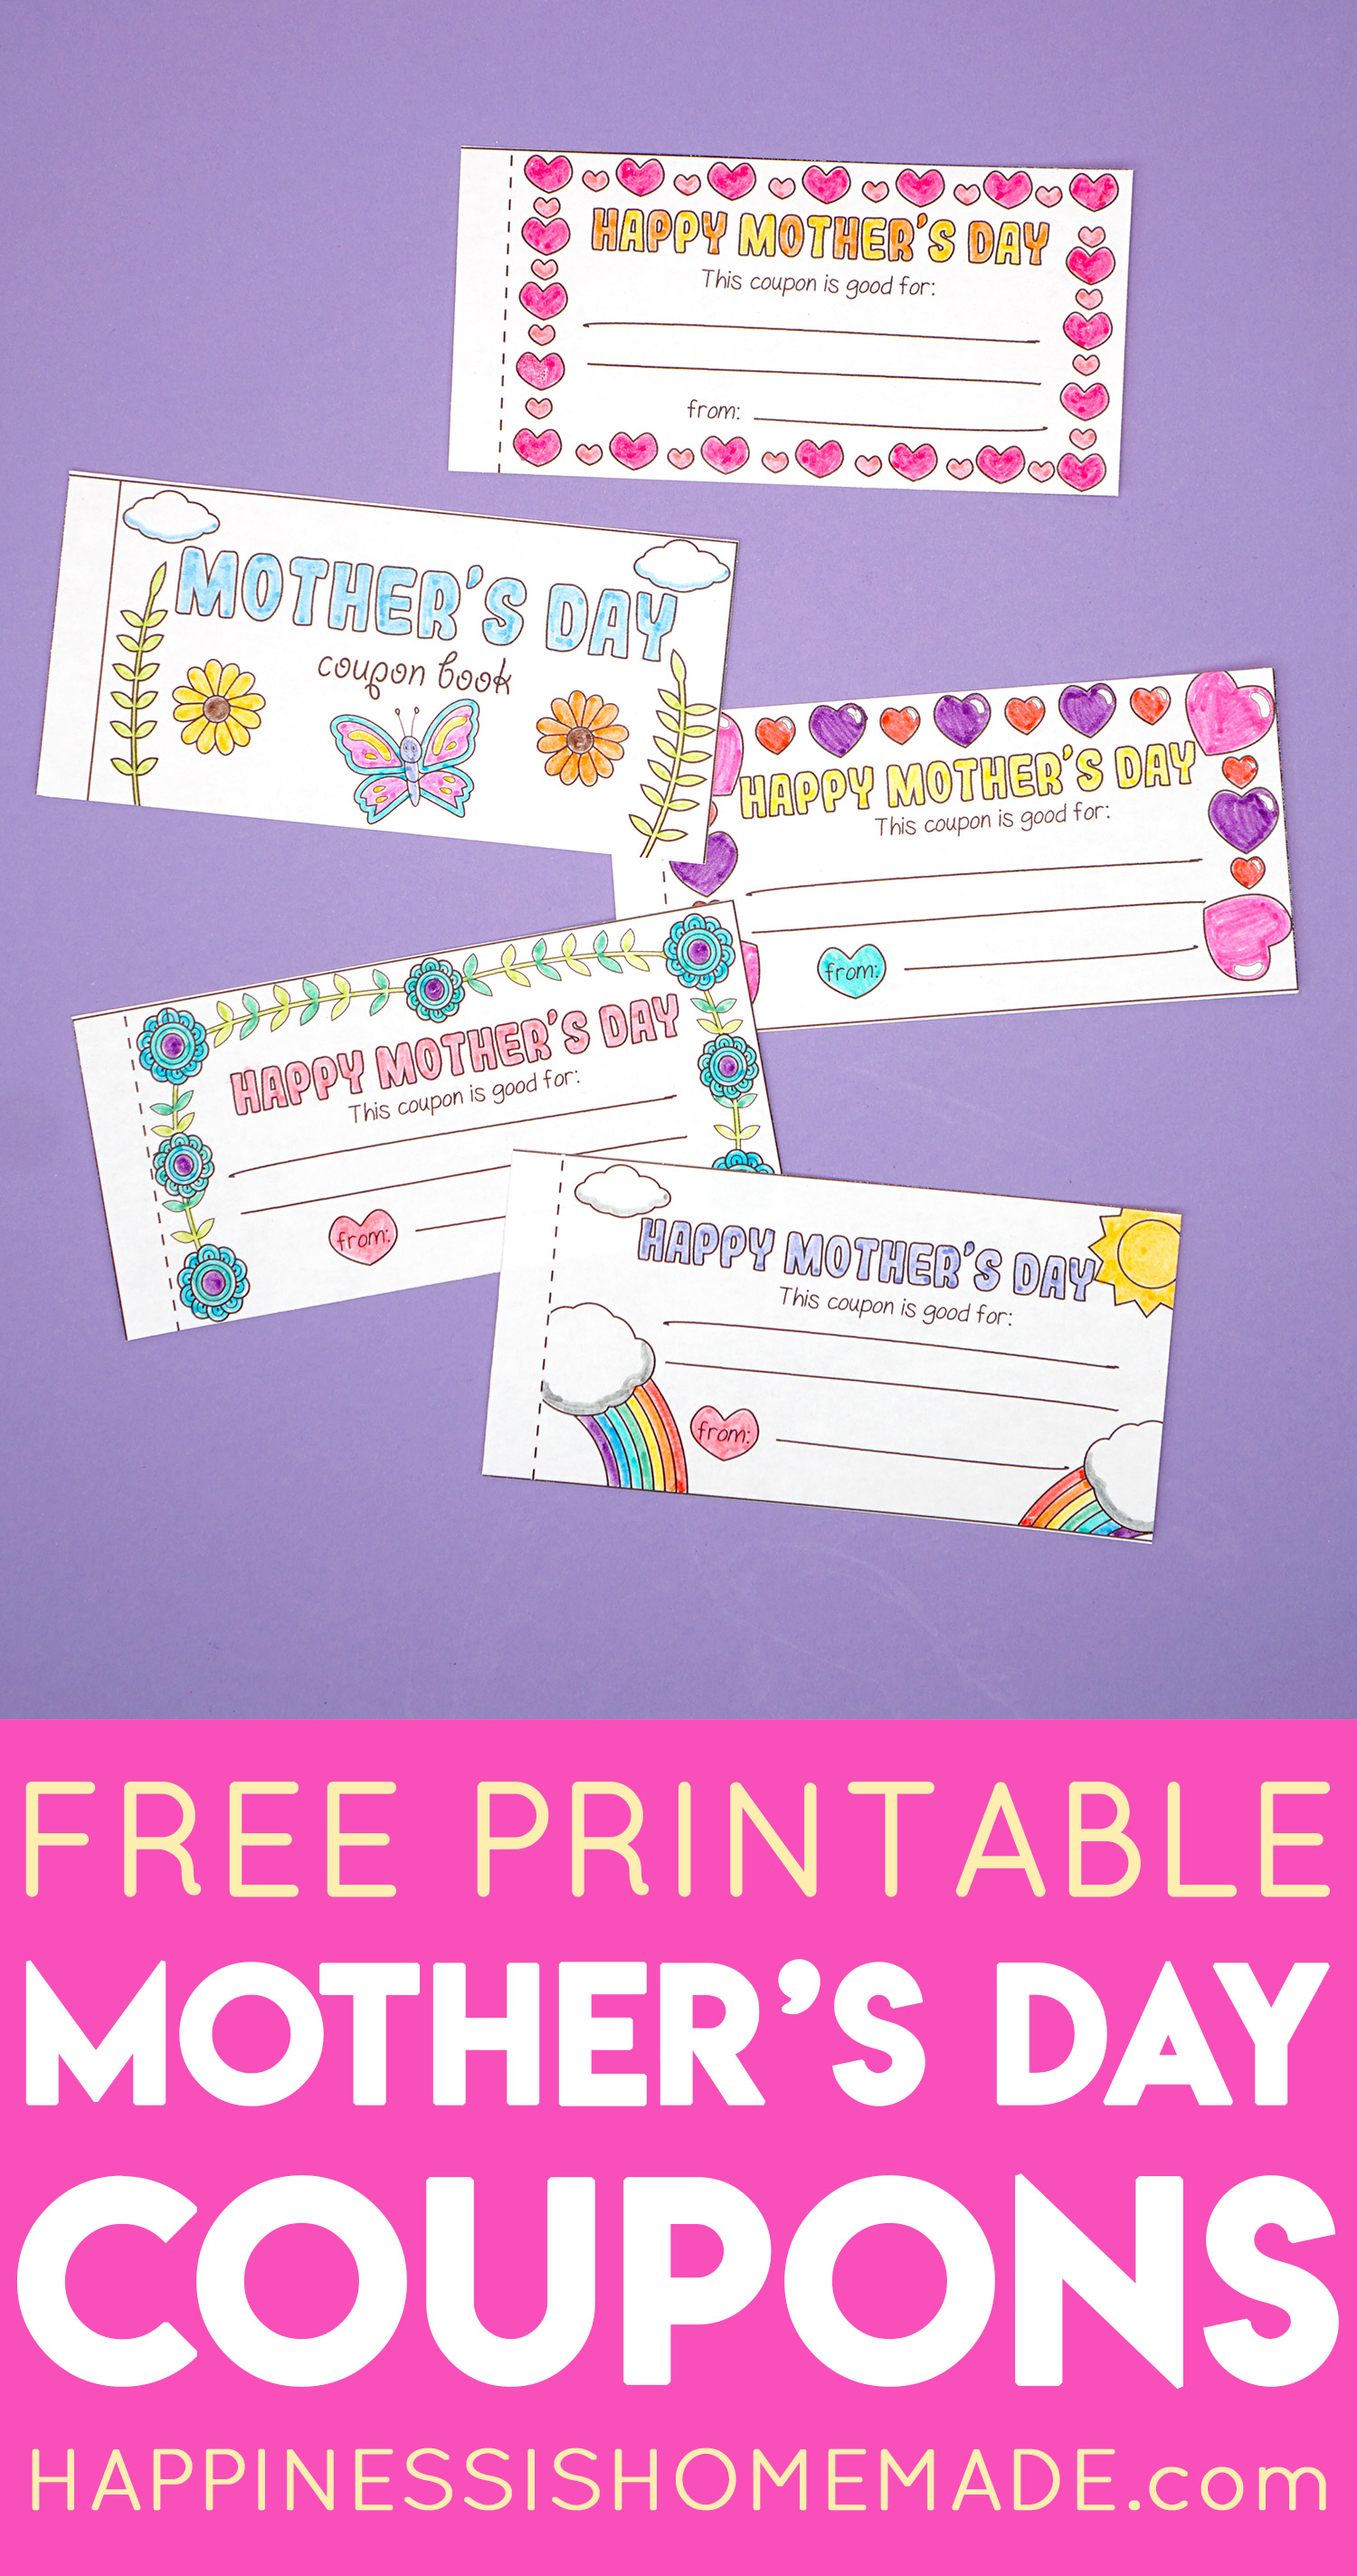 free-printable-mother-s-day-coupons-happiness-is-homemade